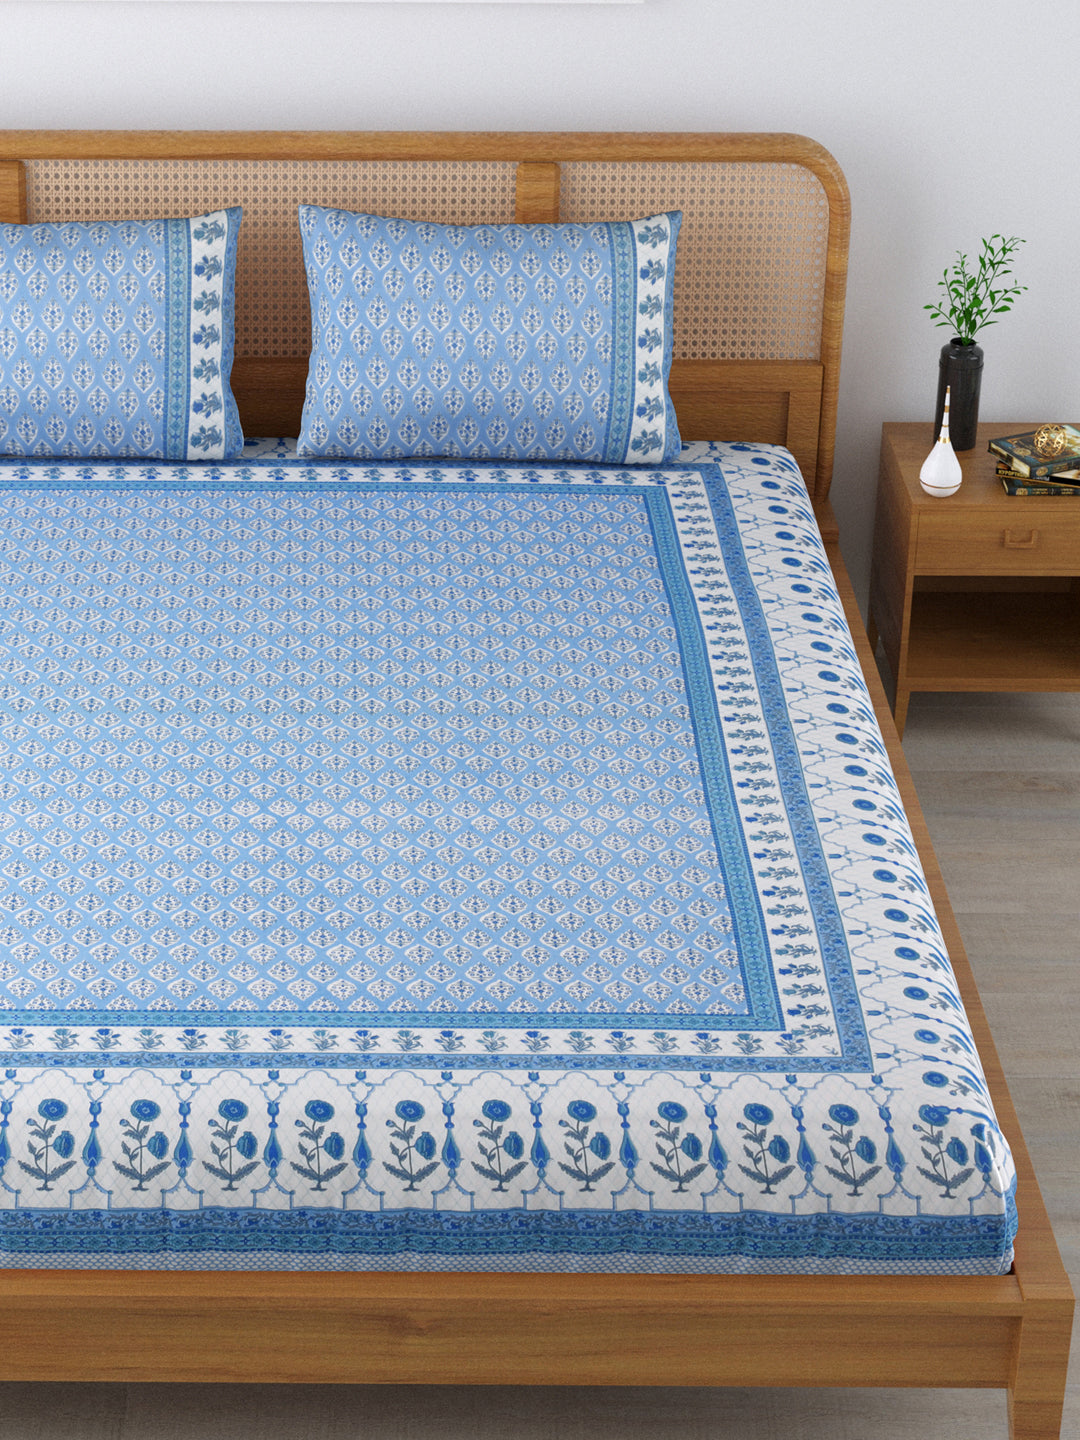 Cotton 220TC King Size Bedsheet With 2 Pillow Covers; White Grey Motif On Blue Base